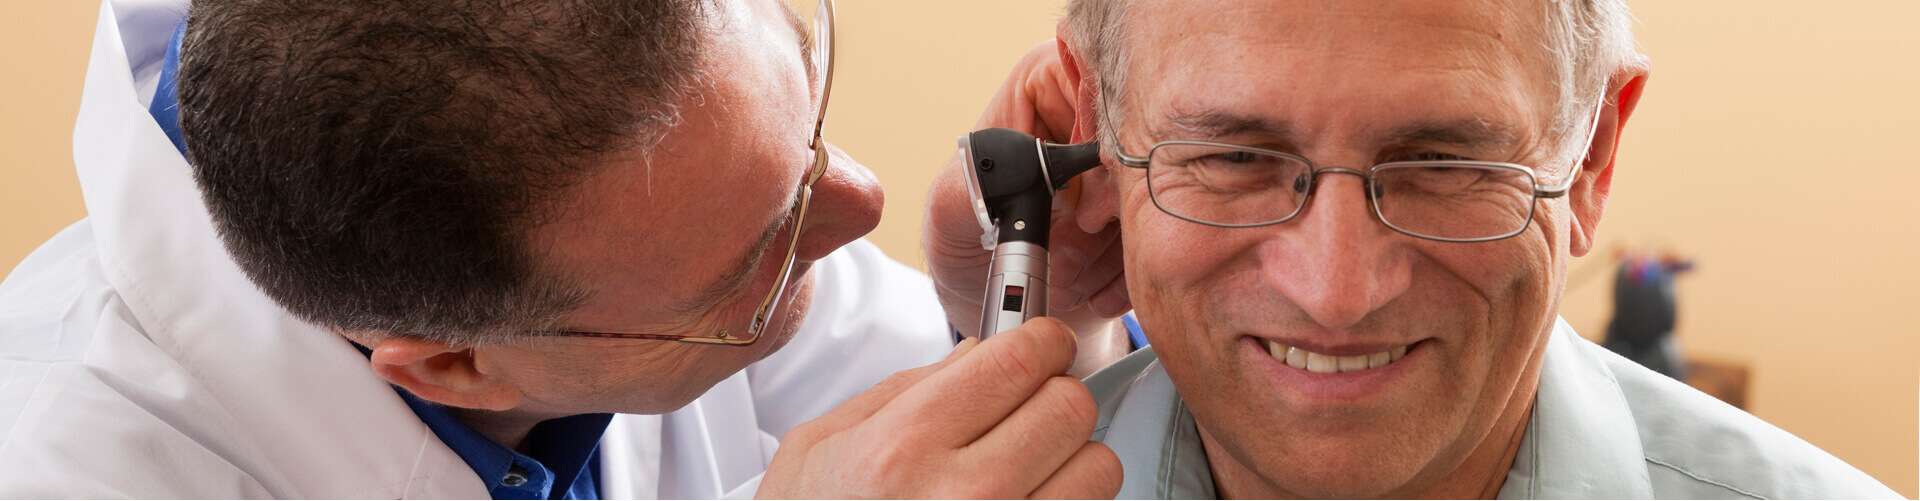 recommending hearing aids for hearing loss